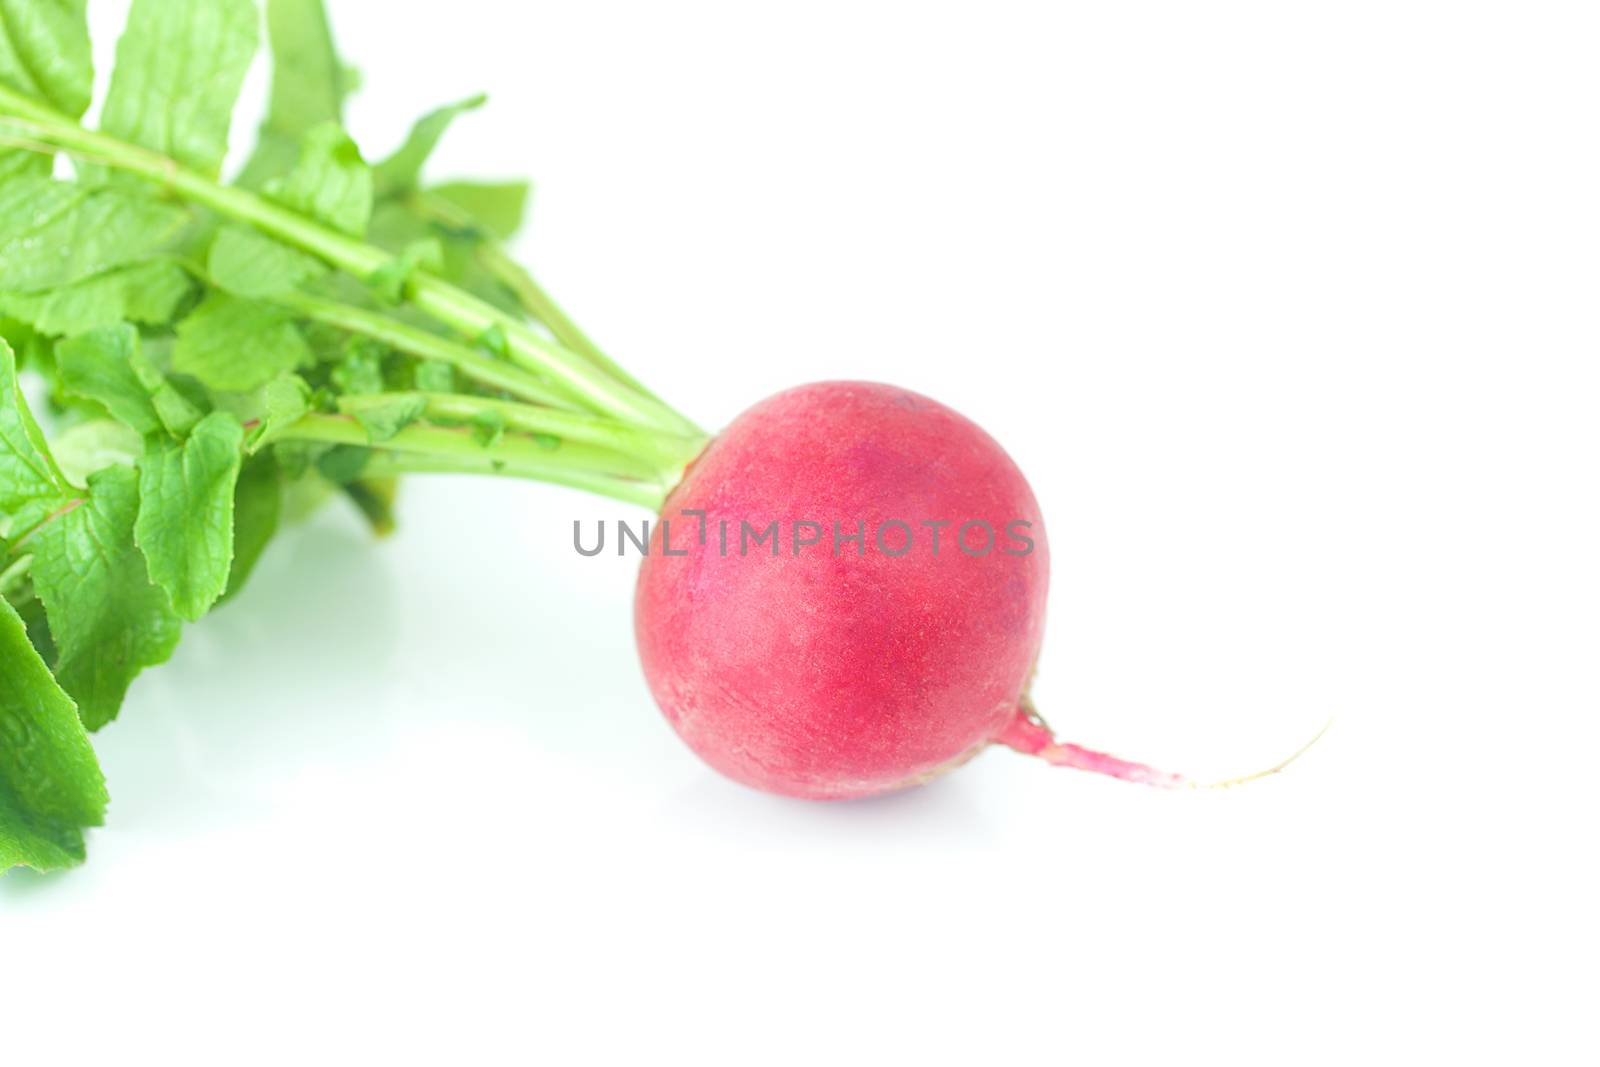 juicy red radish with green leaves isolated on white by jannyjus